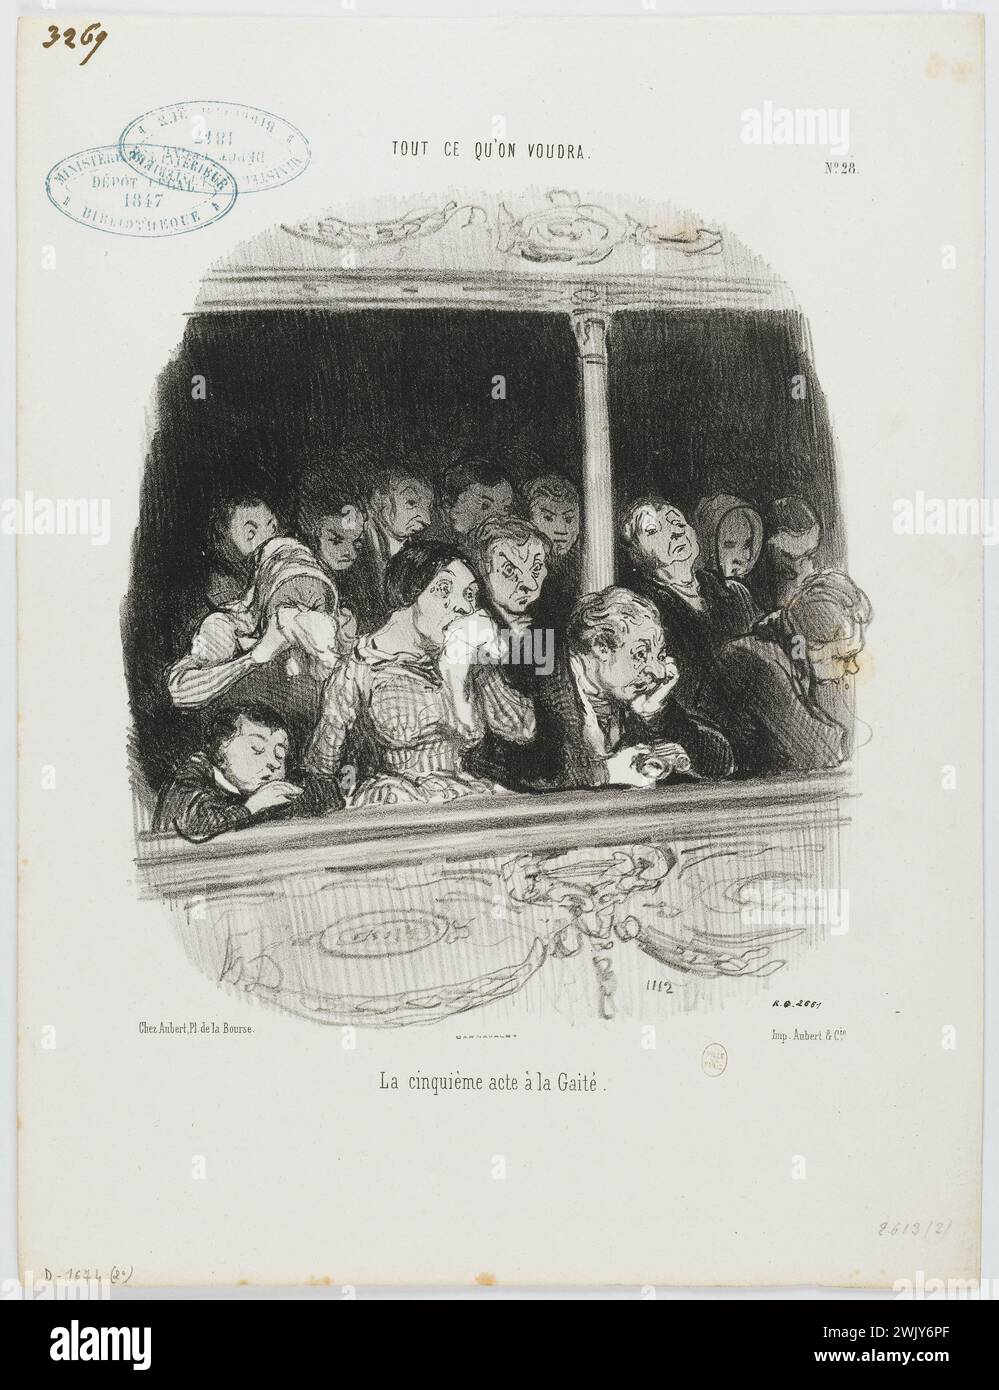 Honoré Daumier (1808-1879). 'Anything we want. The fifth act at La Gaîté (pl.28)'. Black lithography. Paris, Carnavalet museum. 77677-3 Balcony, caricature of manners, emotion, expression, group, person, public, spectator, 19th 19th 19th 19th 19th 19th 19th century, caricature Stock Photo